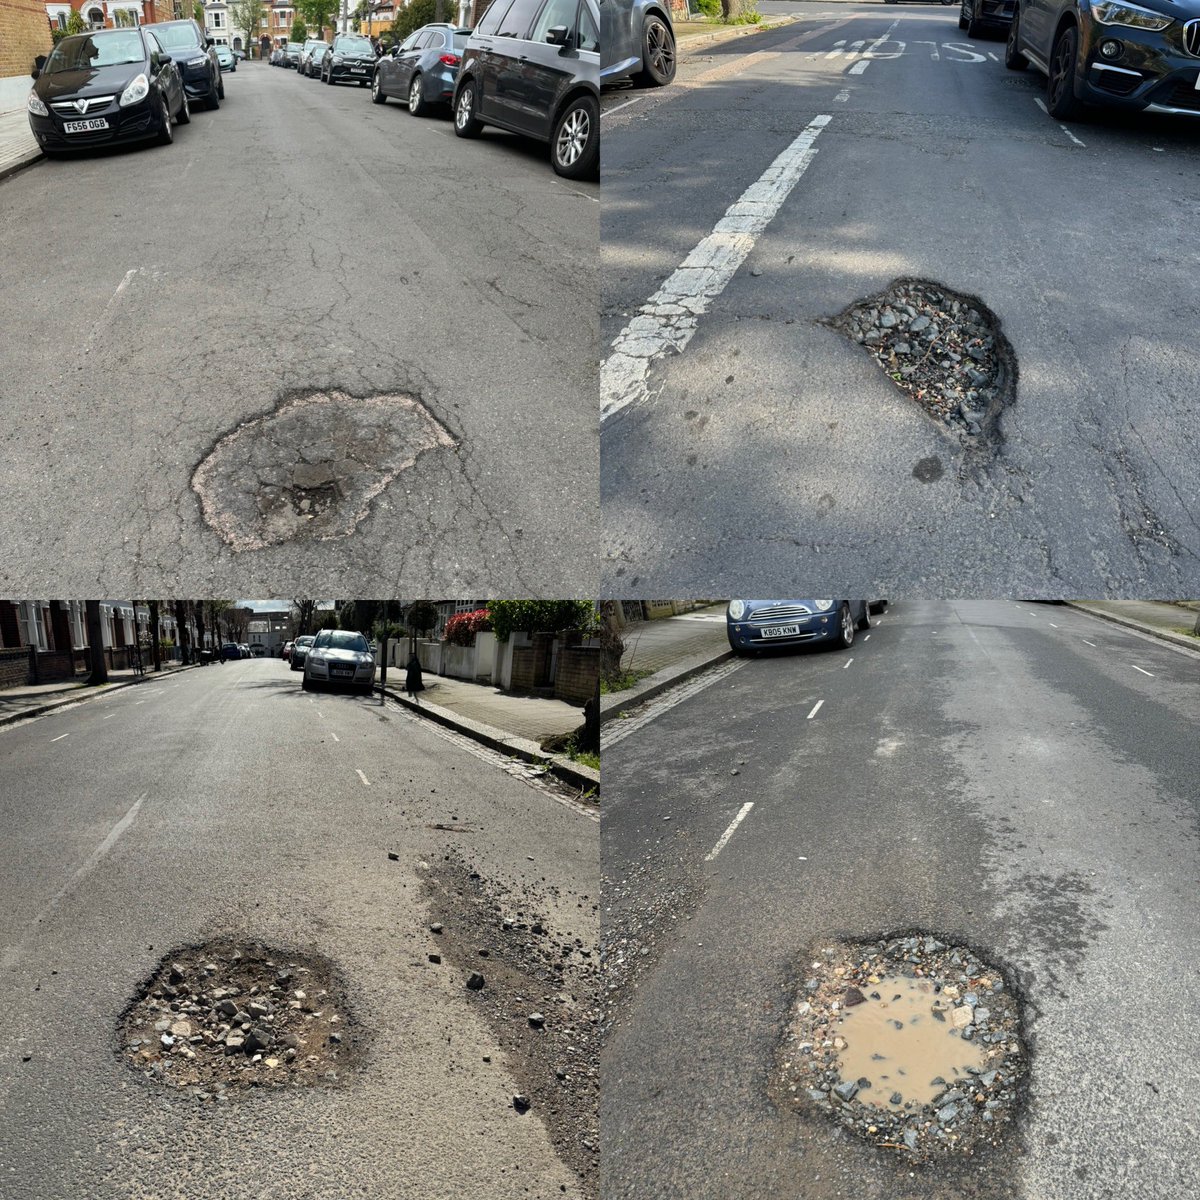 Over the past 2 years, residents in #Wandsworth have seen a continuous decline in fundamental services under the Labour-led council @wandbc. These dangerous potholes in #Balham have been reported several times over the past 8 weeks and still not repaired.